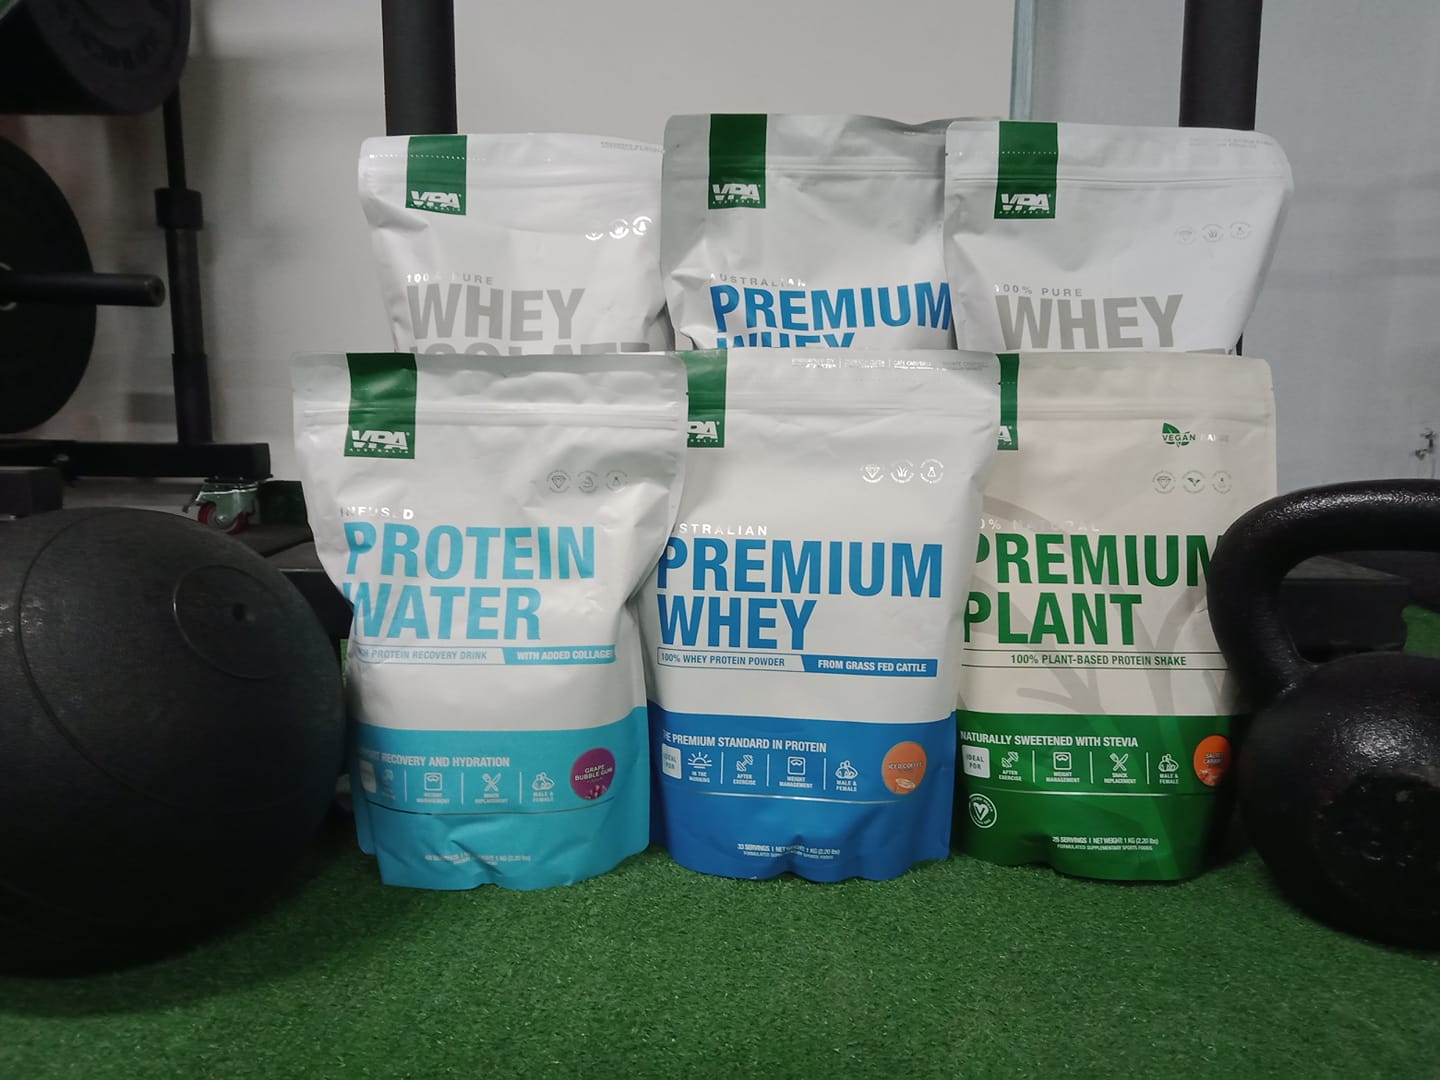 Want to win some protein?